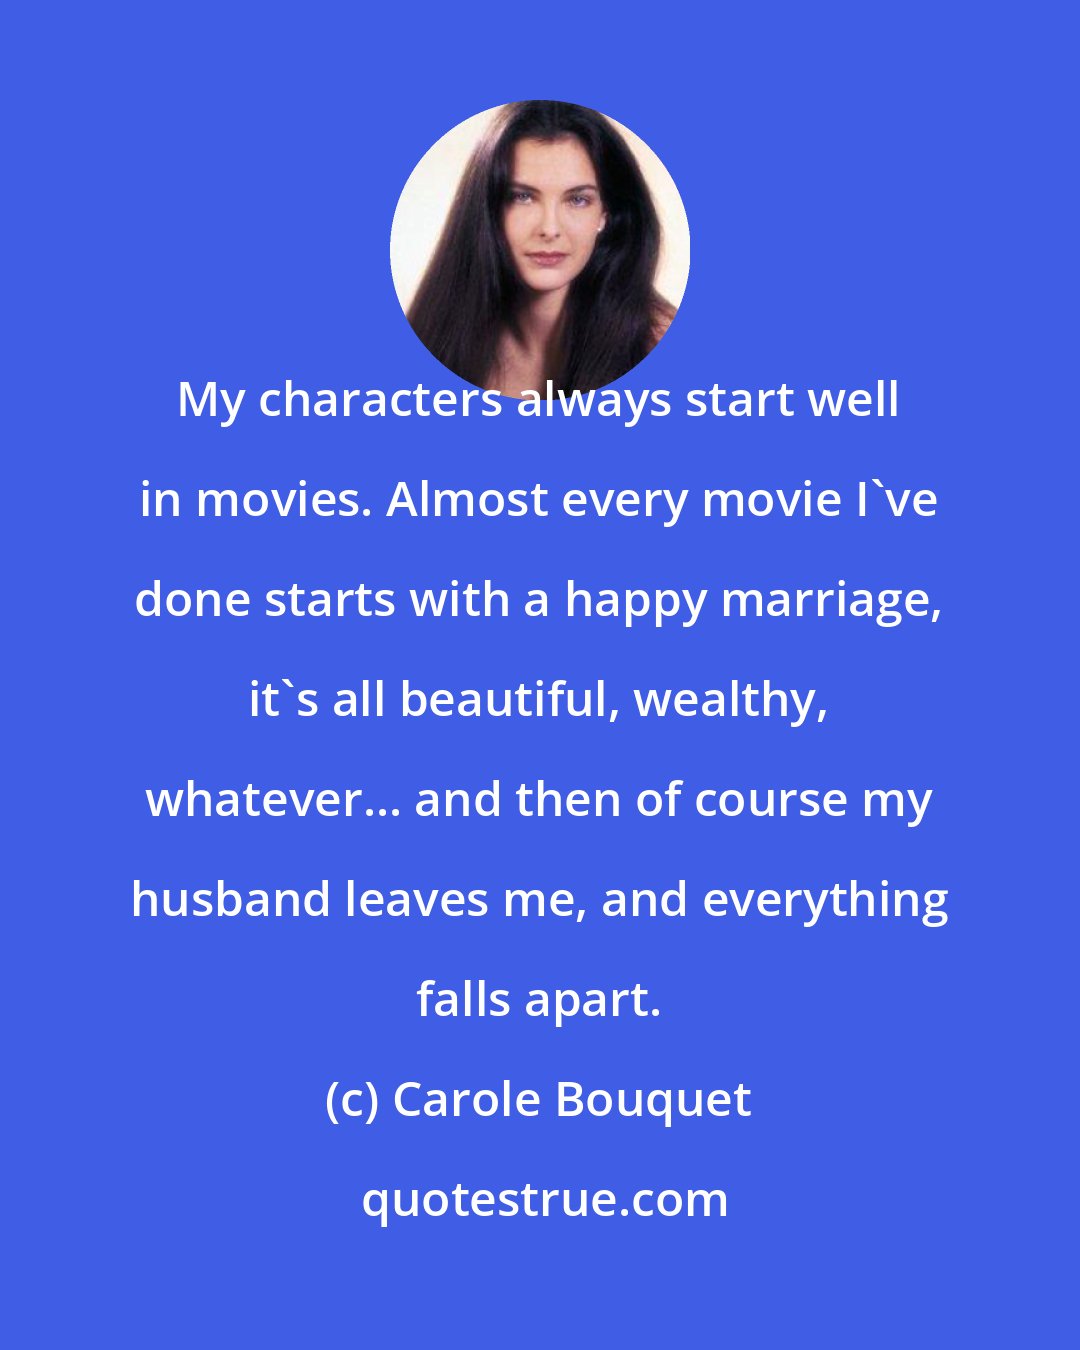 Carole Bouquet: My characters always start well in movies. Almost every movie I've done starts with a happy marriage, it's all beautiful, wealthy, whatever... and then of course my husband leaves me, and everything falls apart.